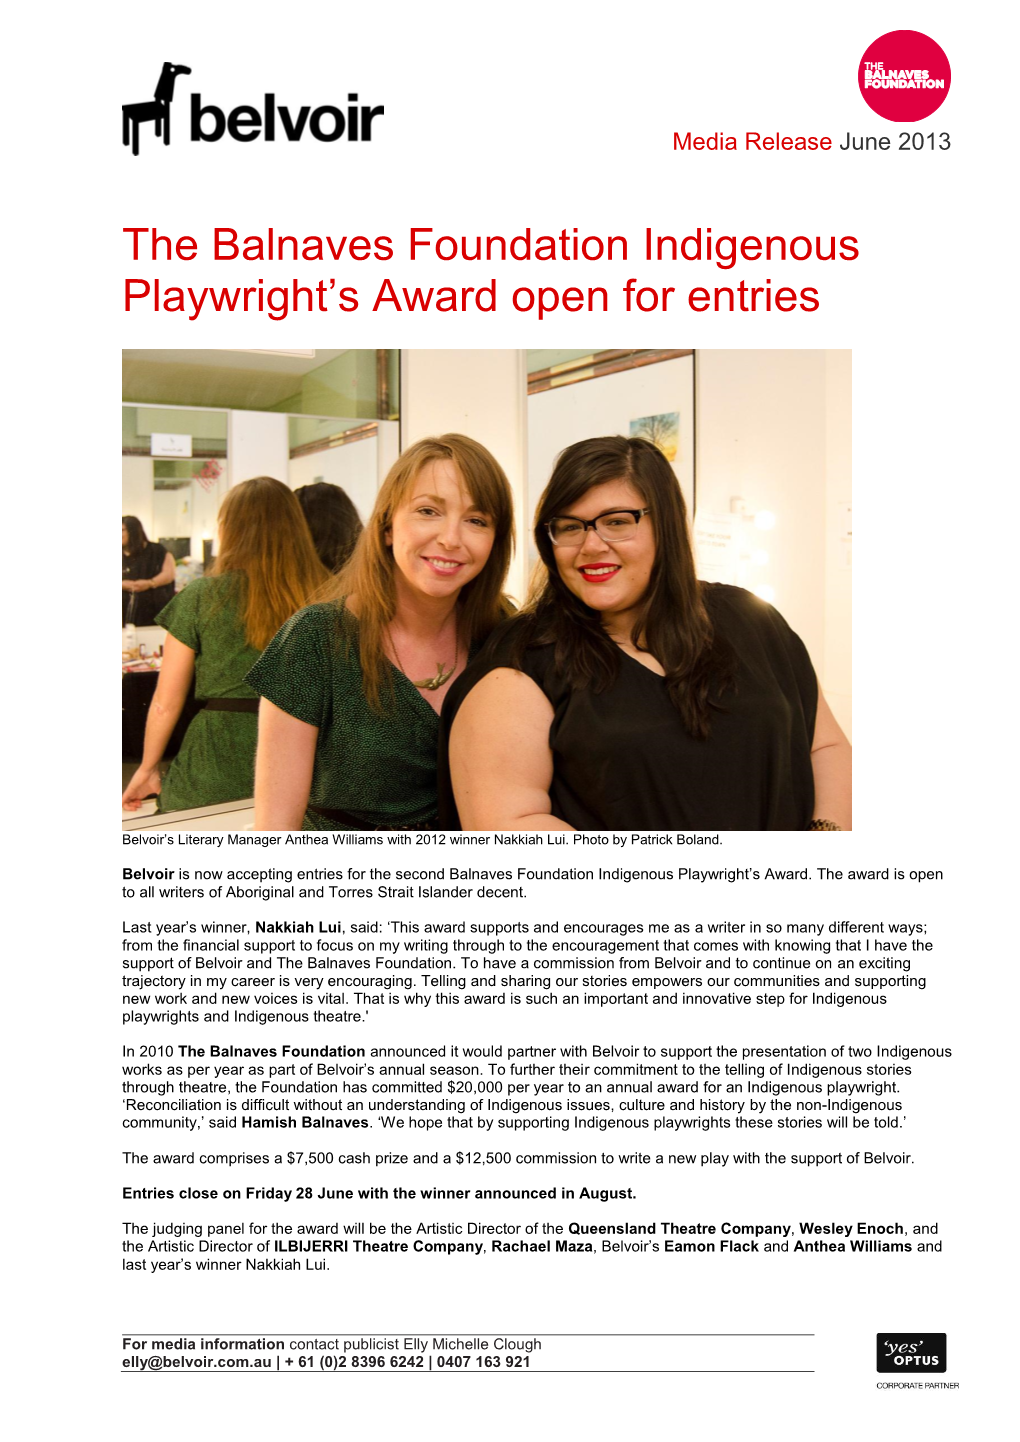 The Balnaves Foundation Indigenous Playwright’S Award Open for Entries